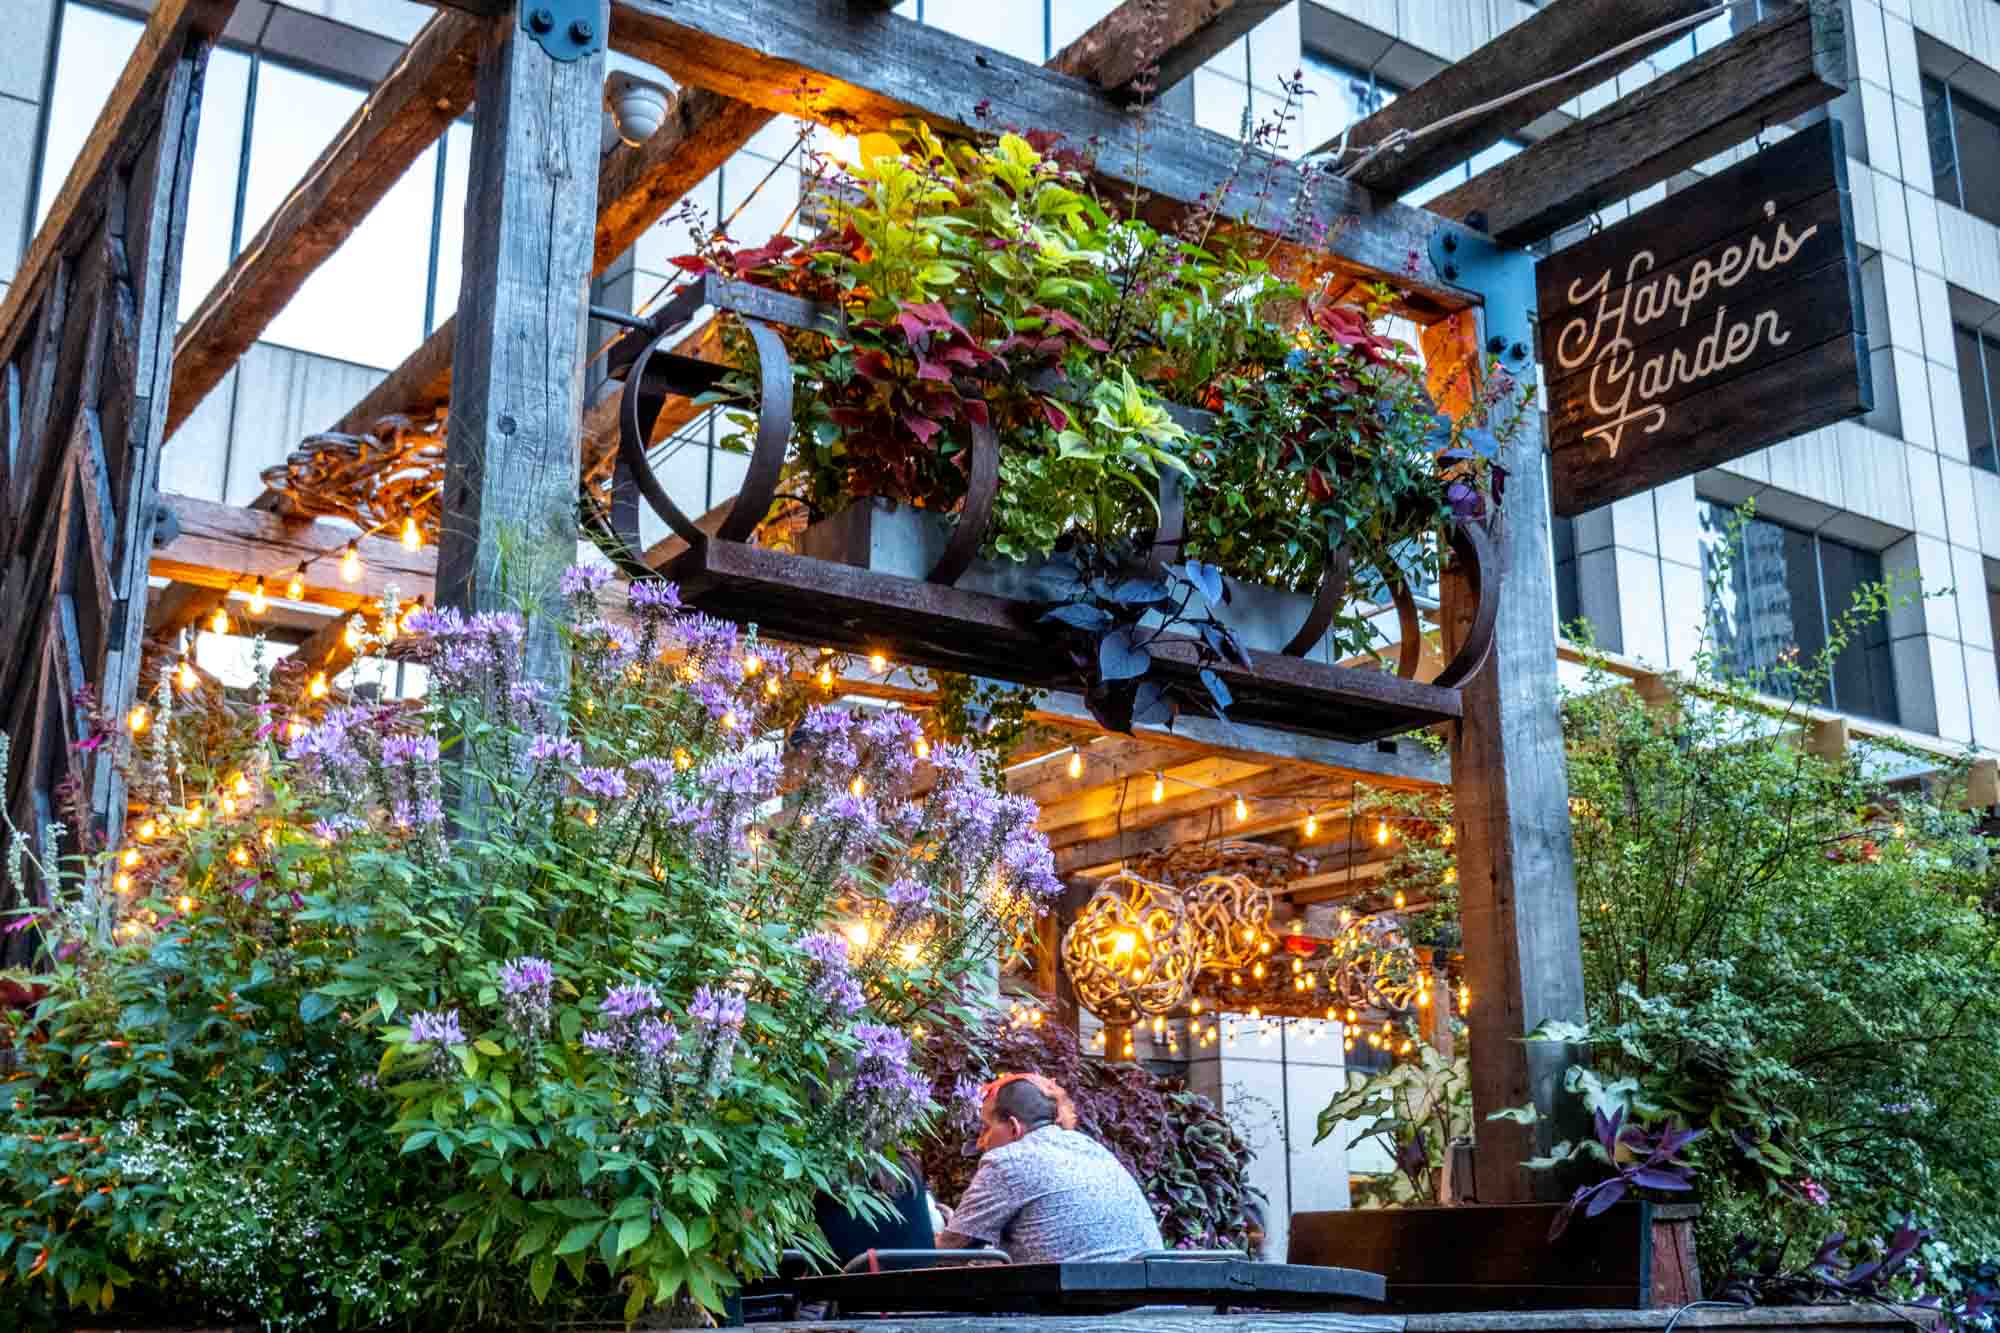 Restaurant patio filled with plants, flowers, and warm light fixtures and a sign for "Harper's Garden"